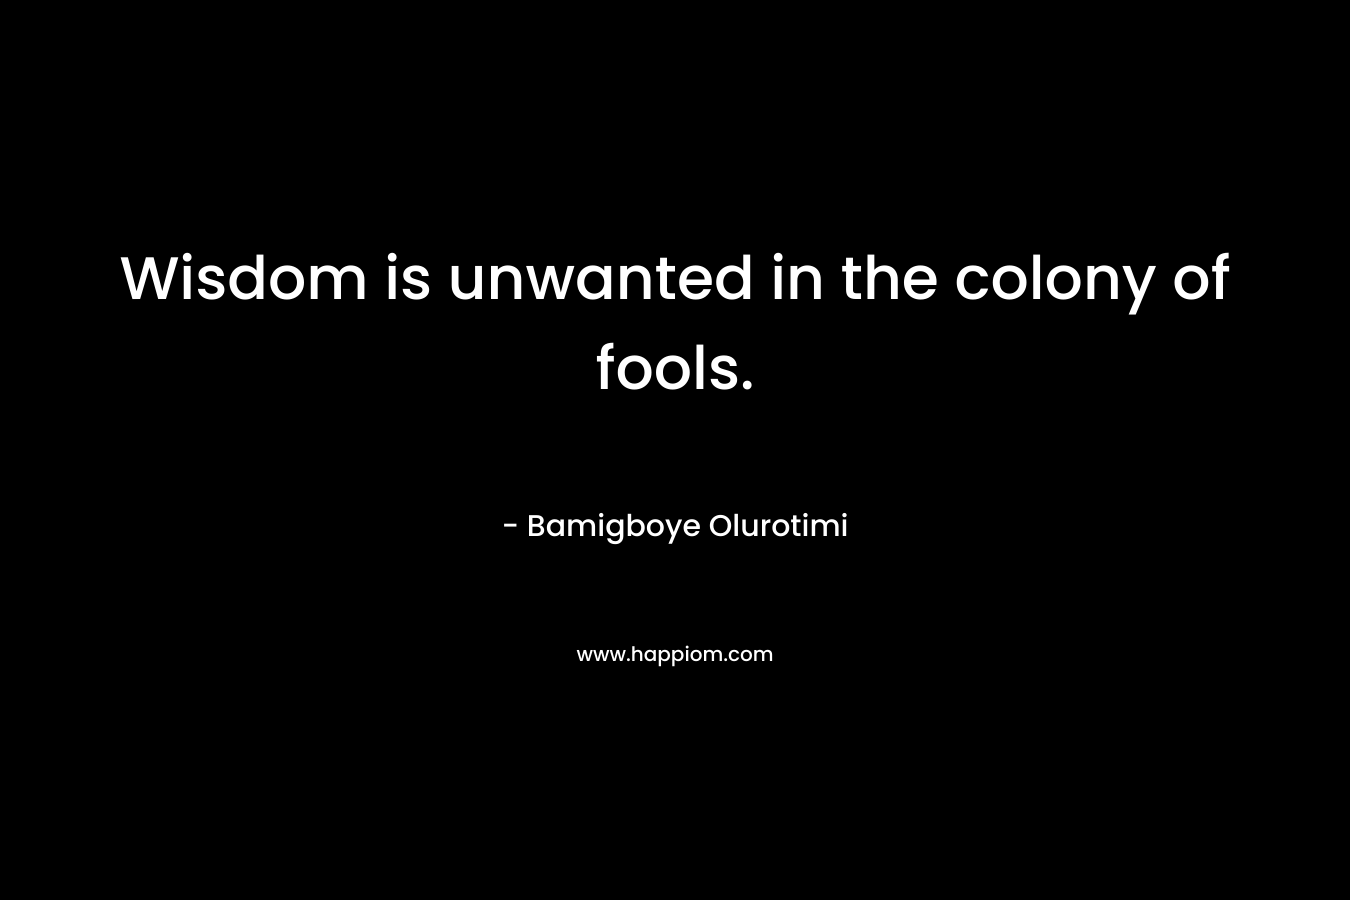 Wisdom is unwanted in the colony of fools.